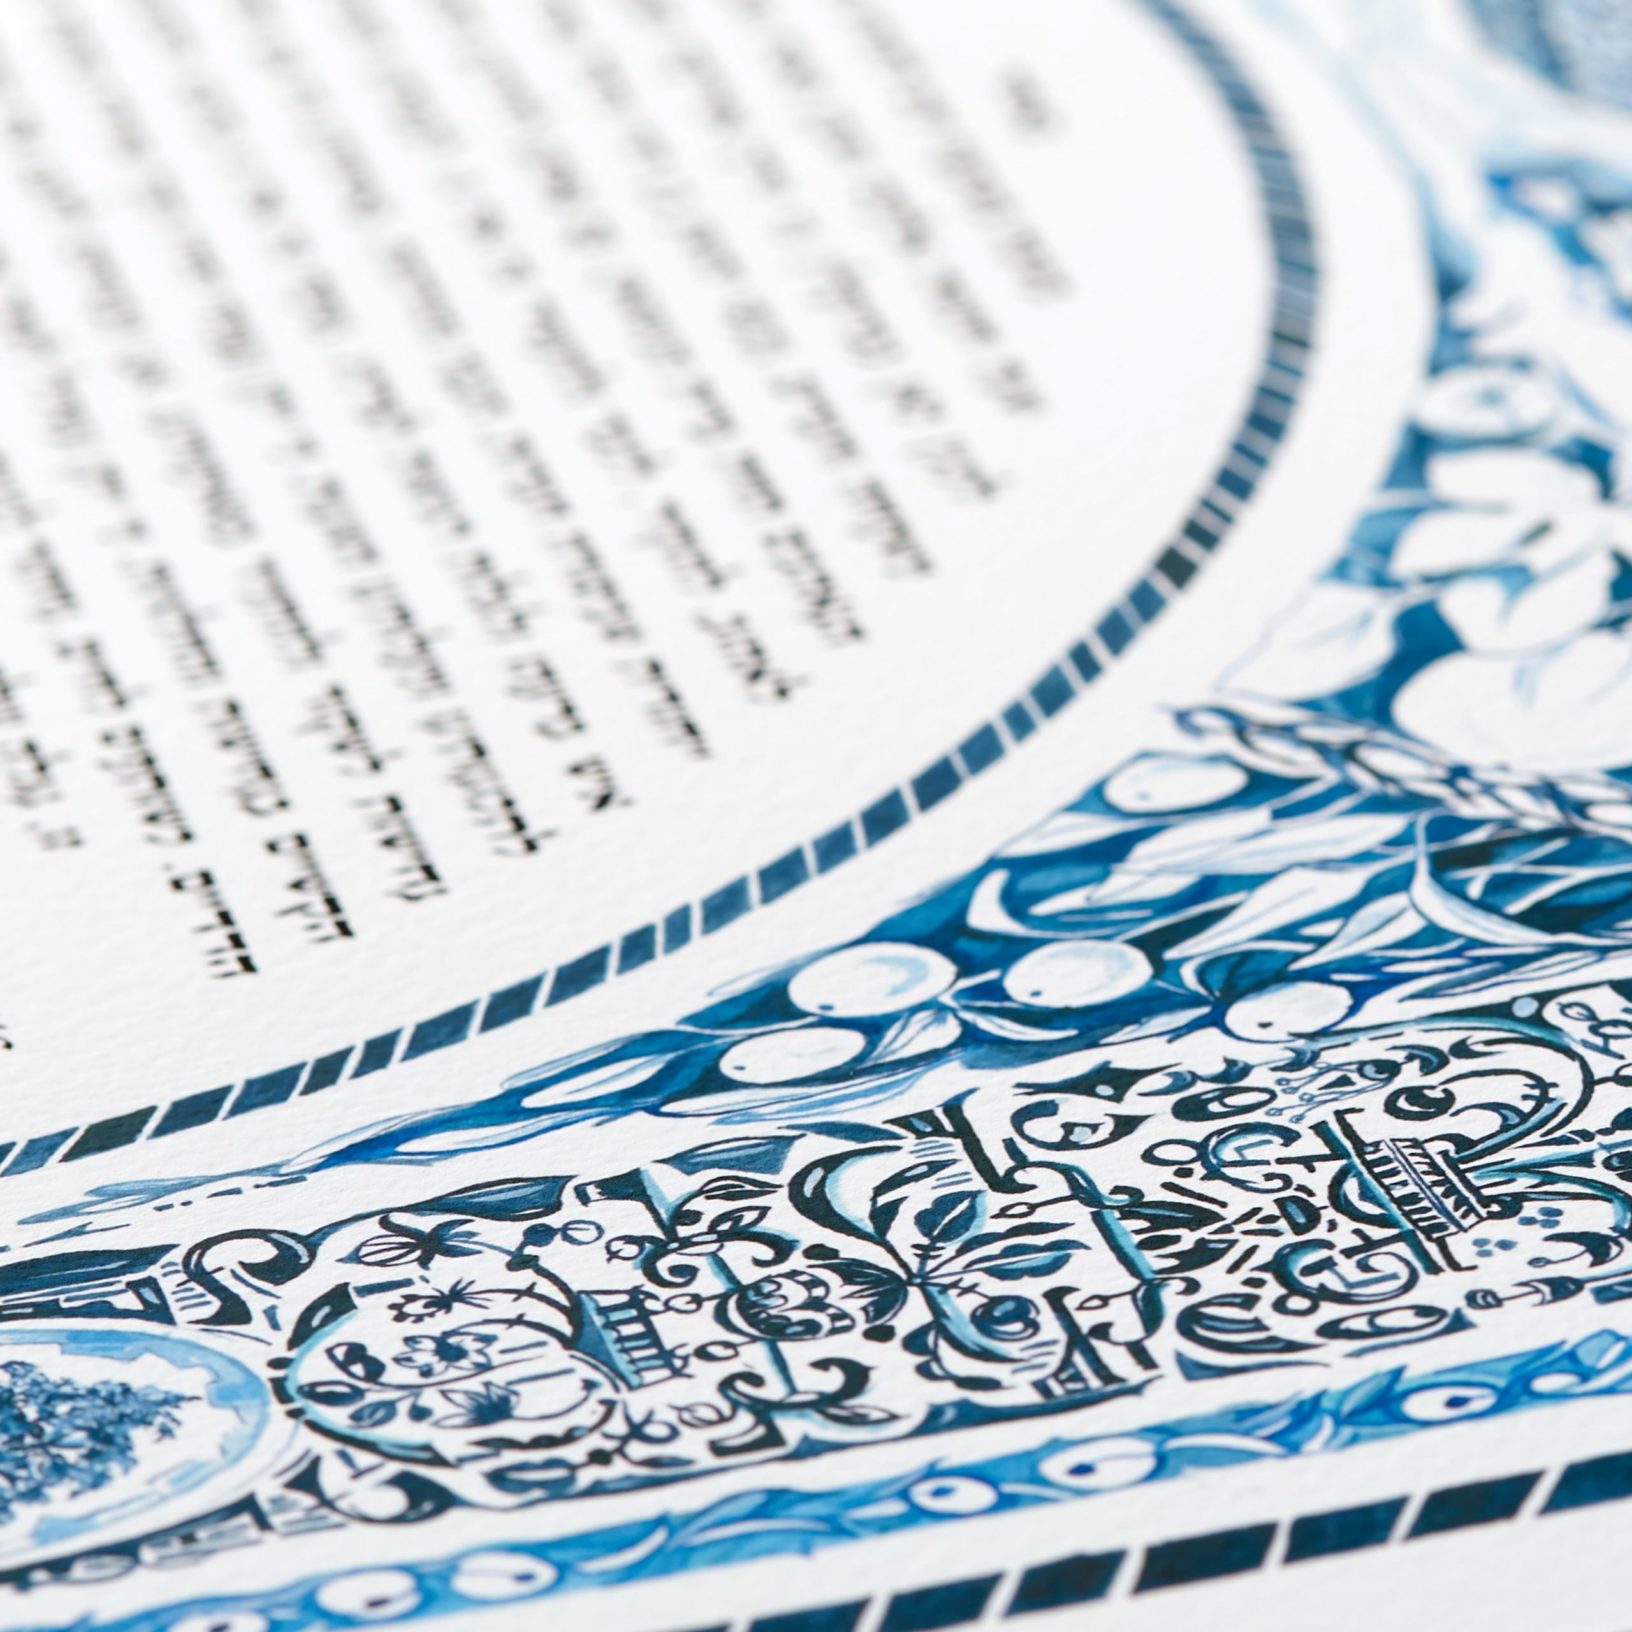 Blue - Peace & Tranquility Ketubah Jewish Marriage Contracts by Angela Munitz